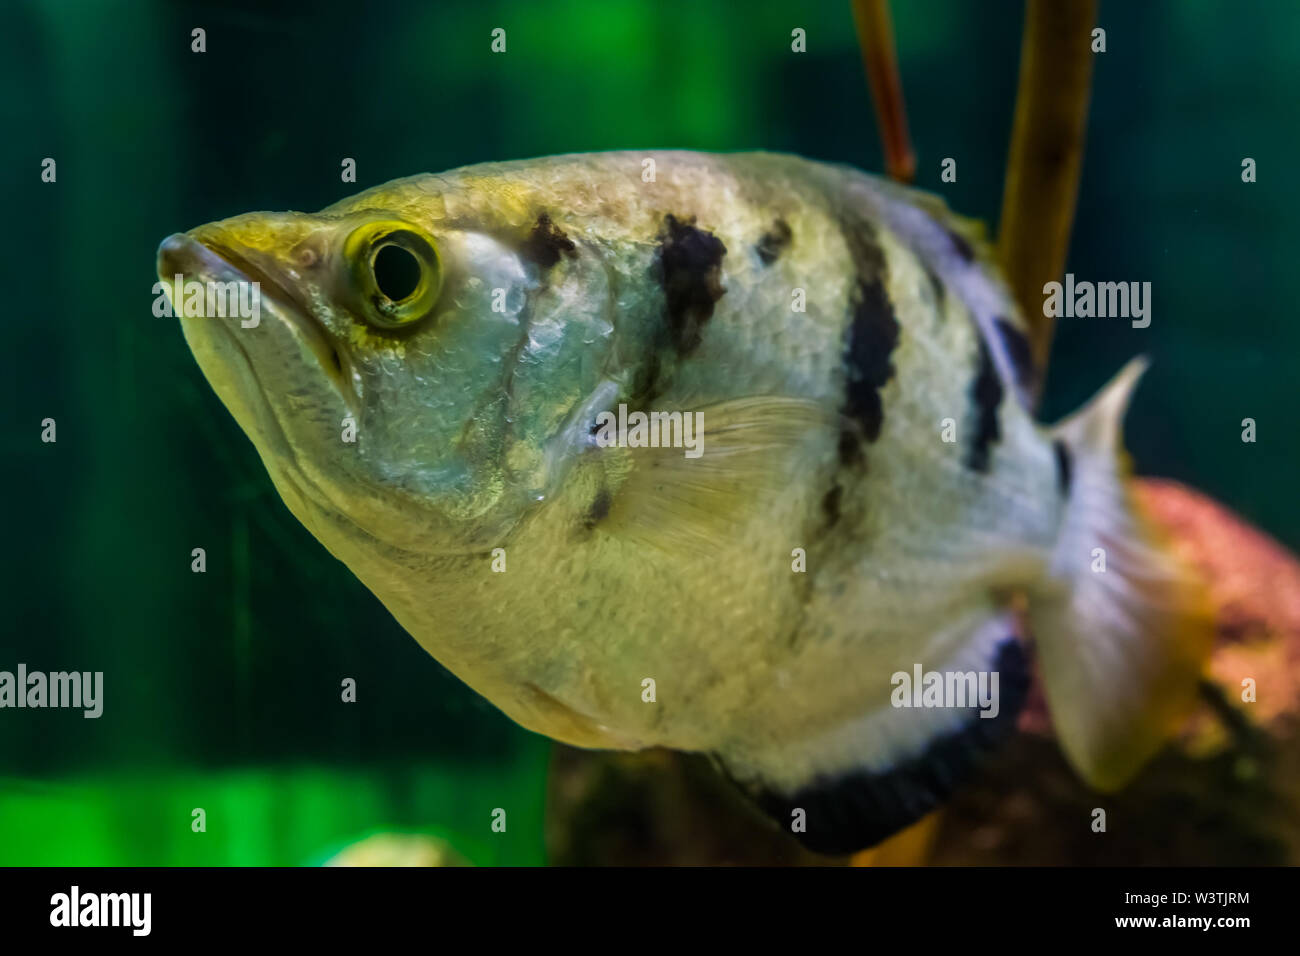 funny closeup of the face of a banded archer fish, Popular aquarium pet in aquaculture, tropical animal specie from the Indo-pacific ocean Stock Photo